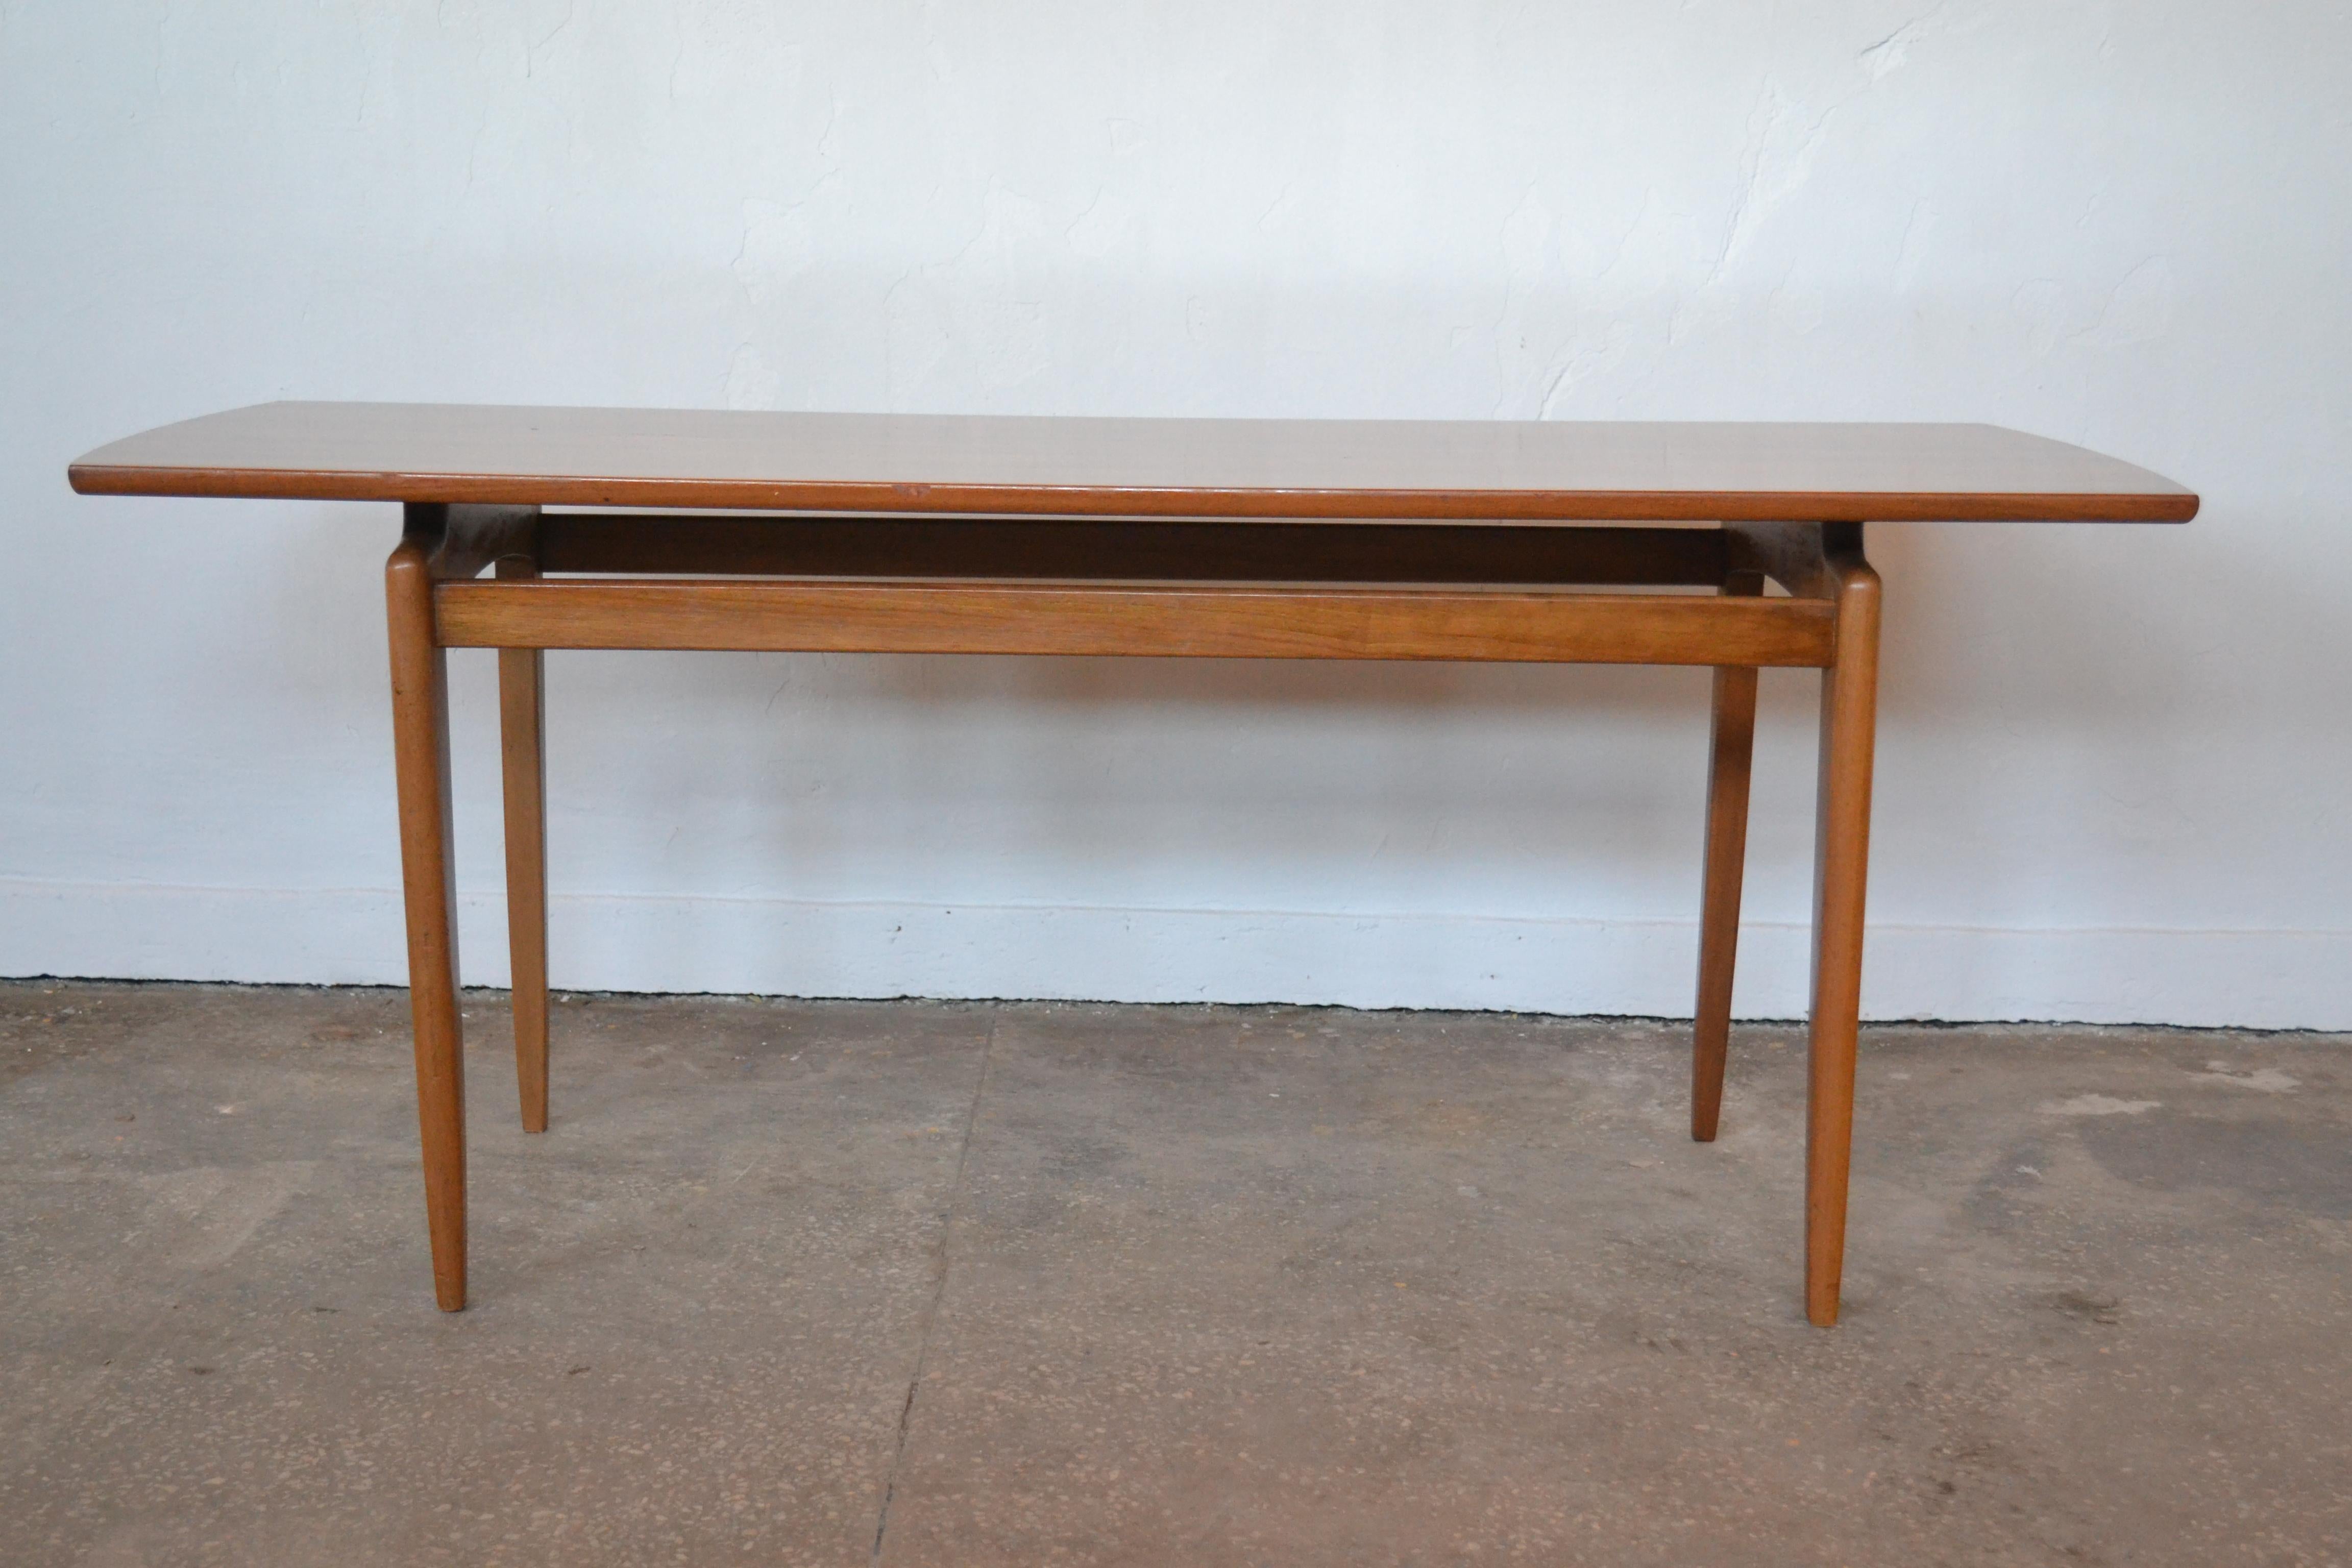 This coffee table from the 1970s was produced by Wilhelm Renz. It remains fully original.